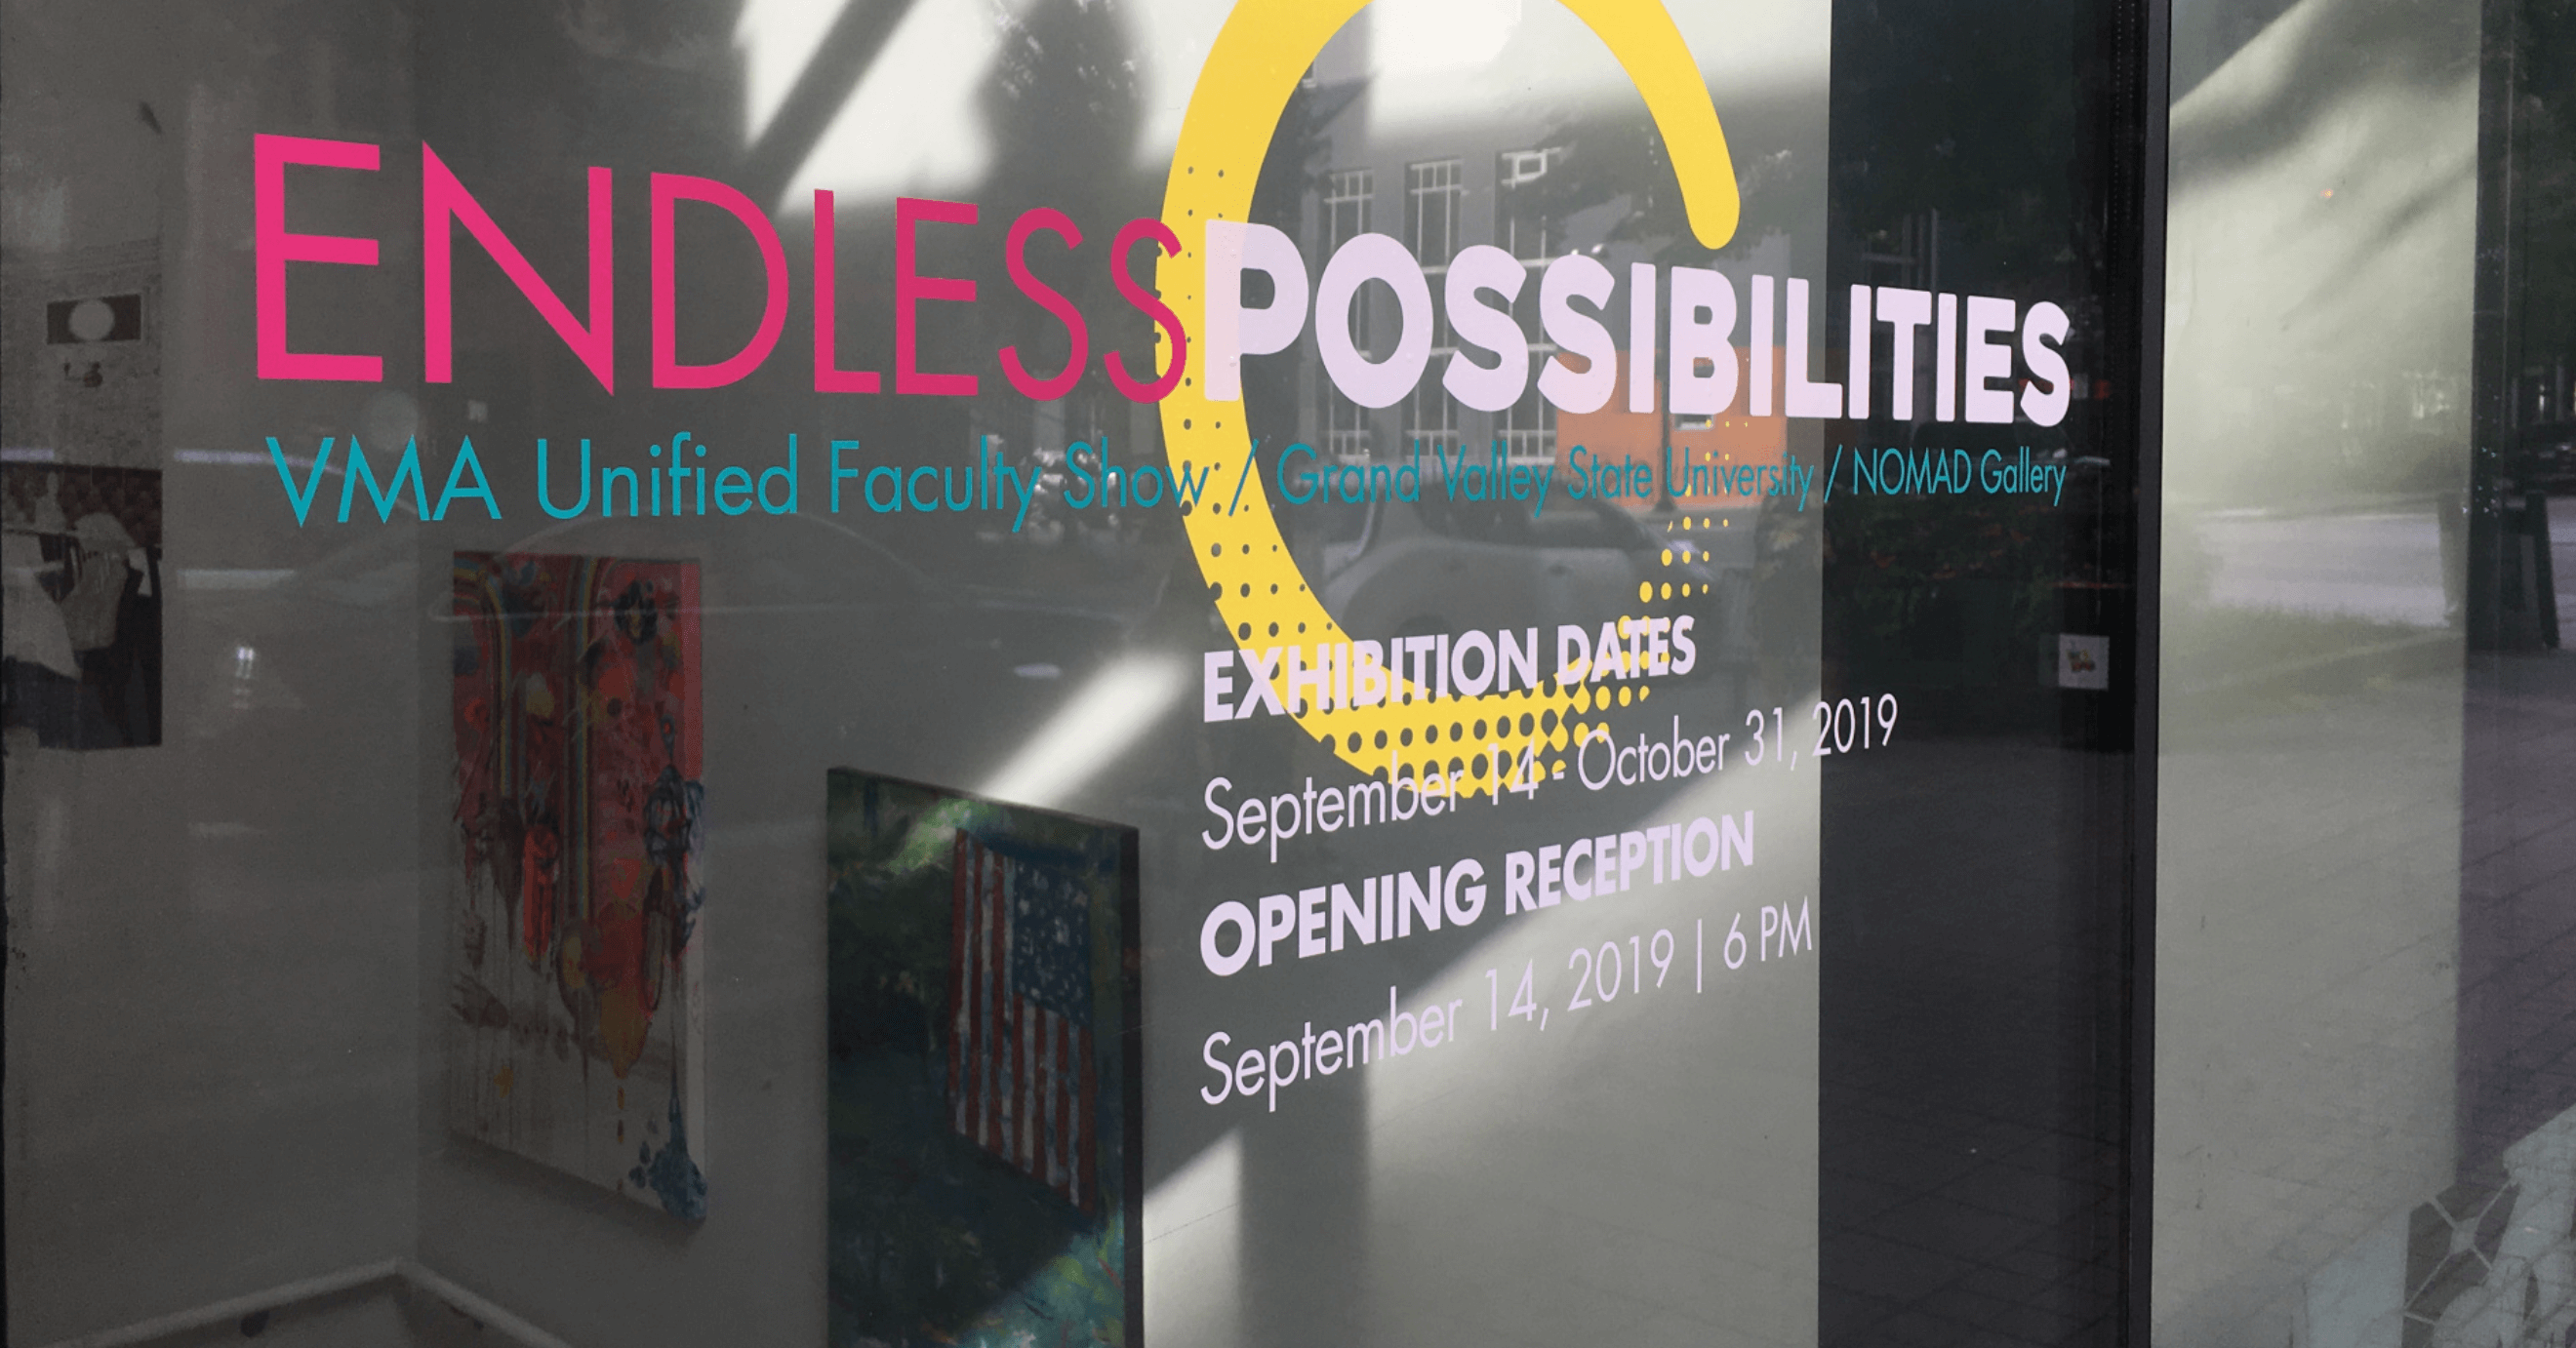 The "Endless Possibilities" exhibition runs through Oct. 31.